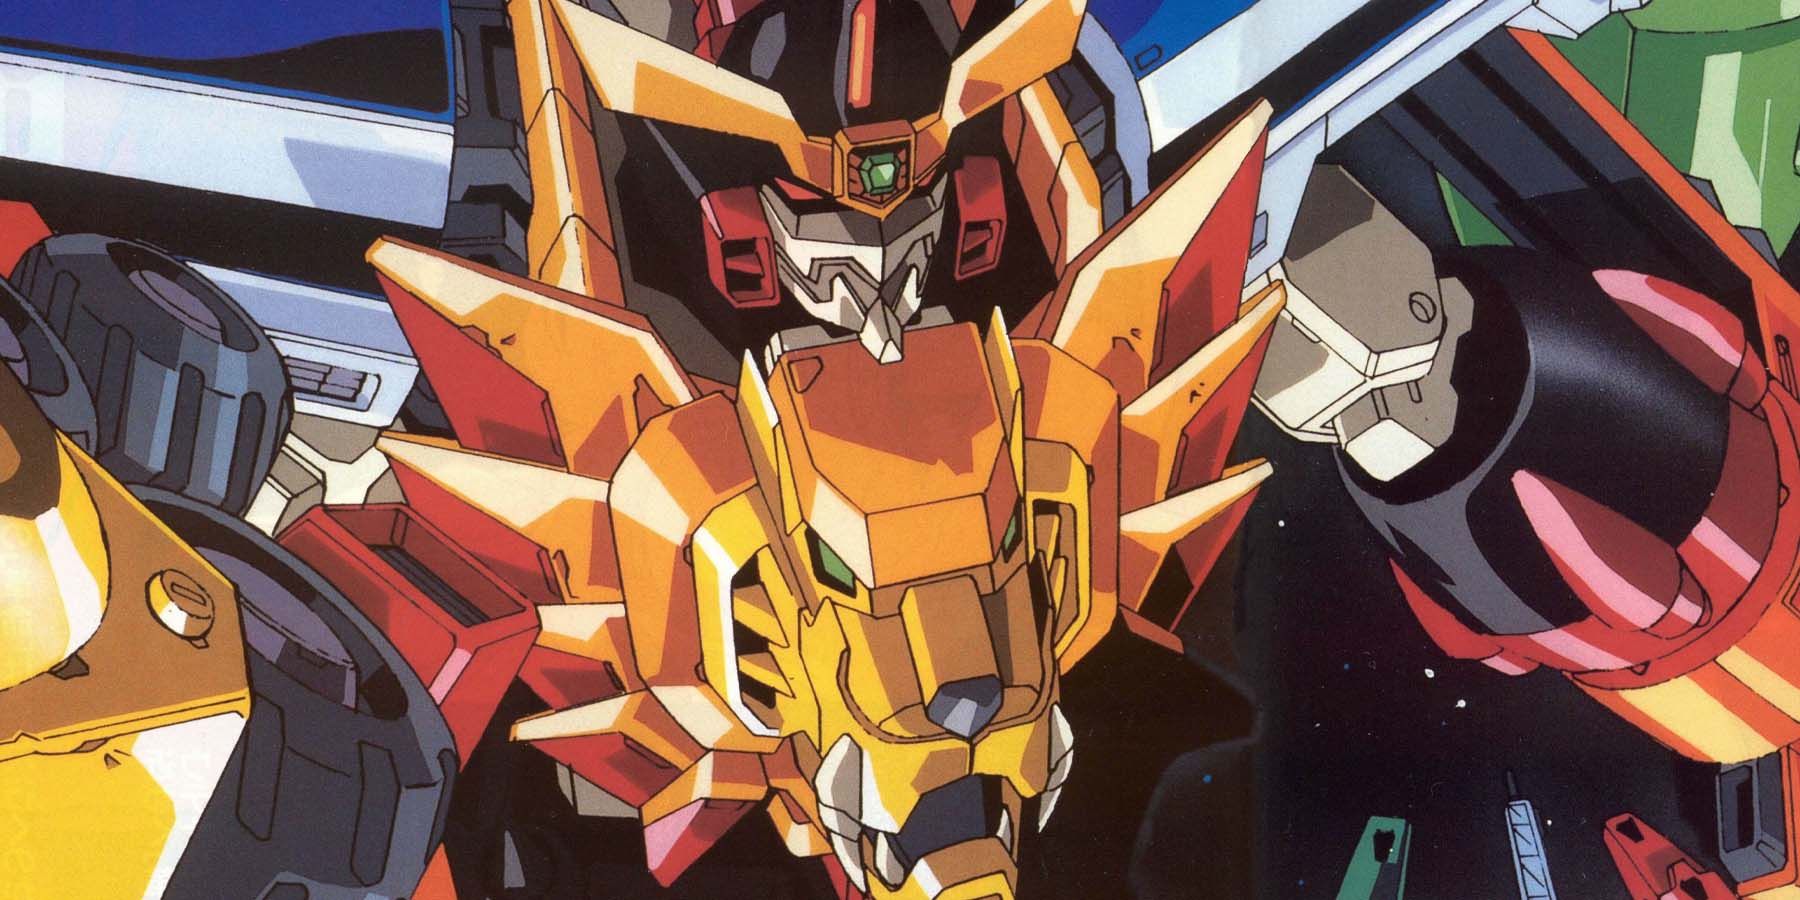 The King Of Braves GaoGaiGar anime